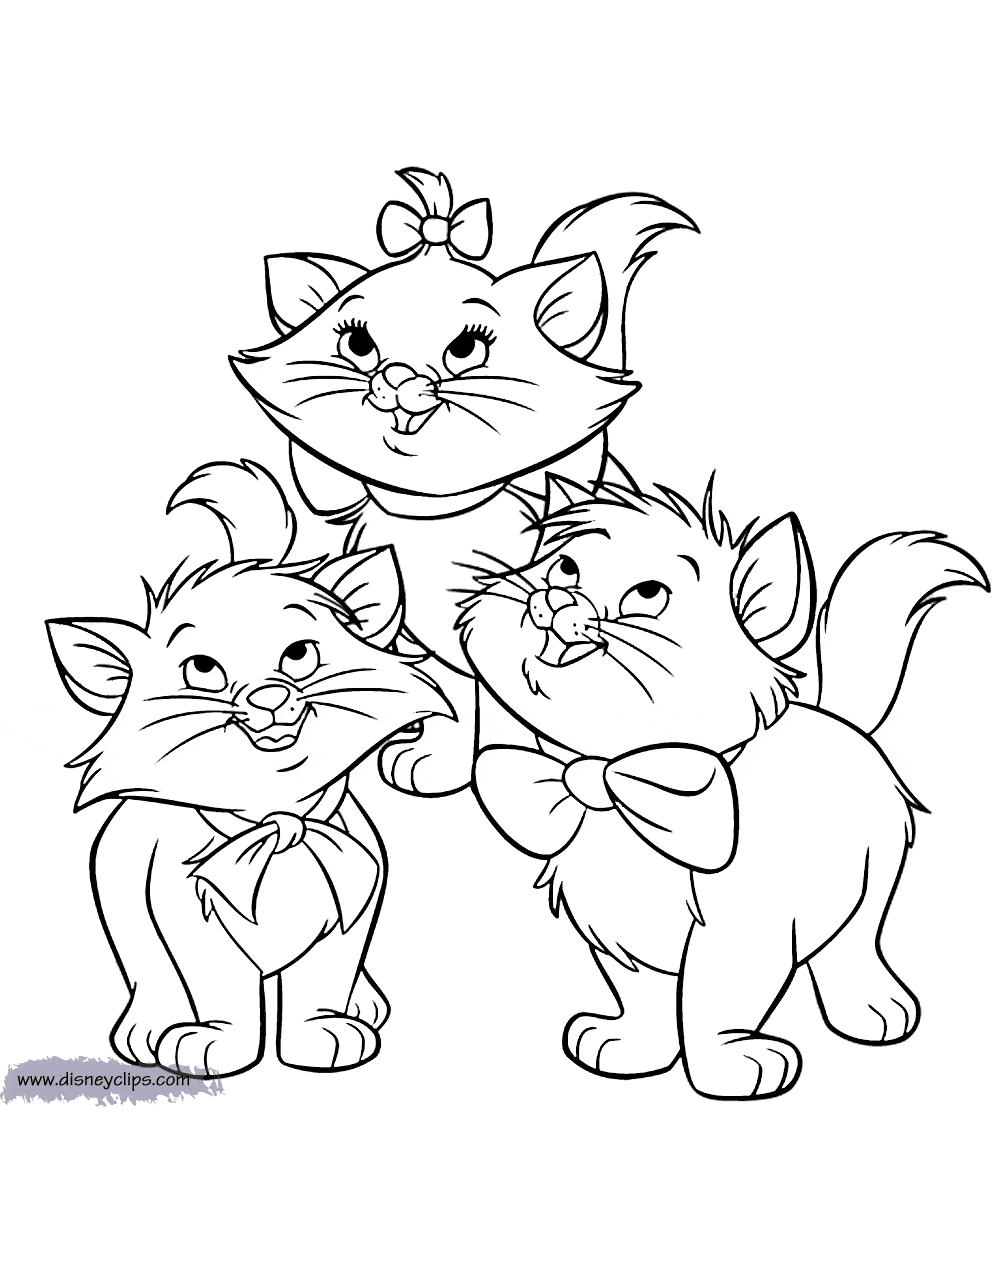 The Aristocats Printable Coloring Pages | Disney Coloring Book